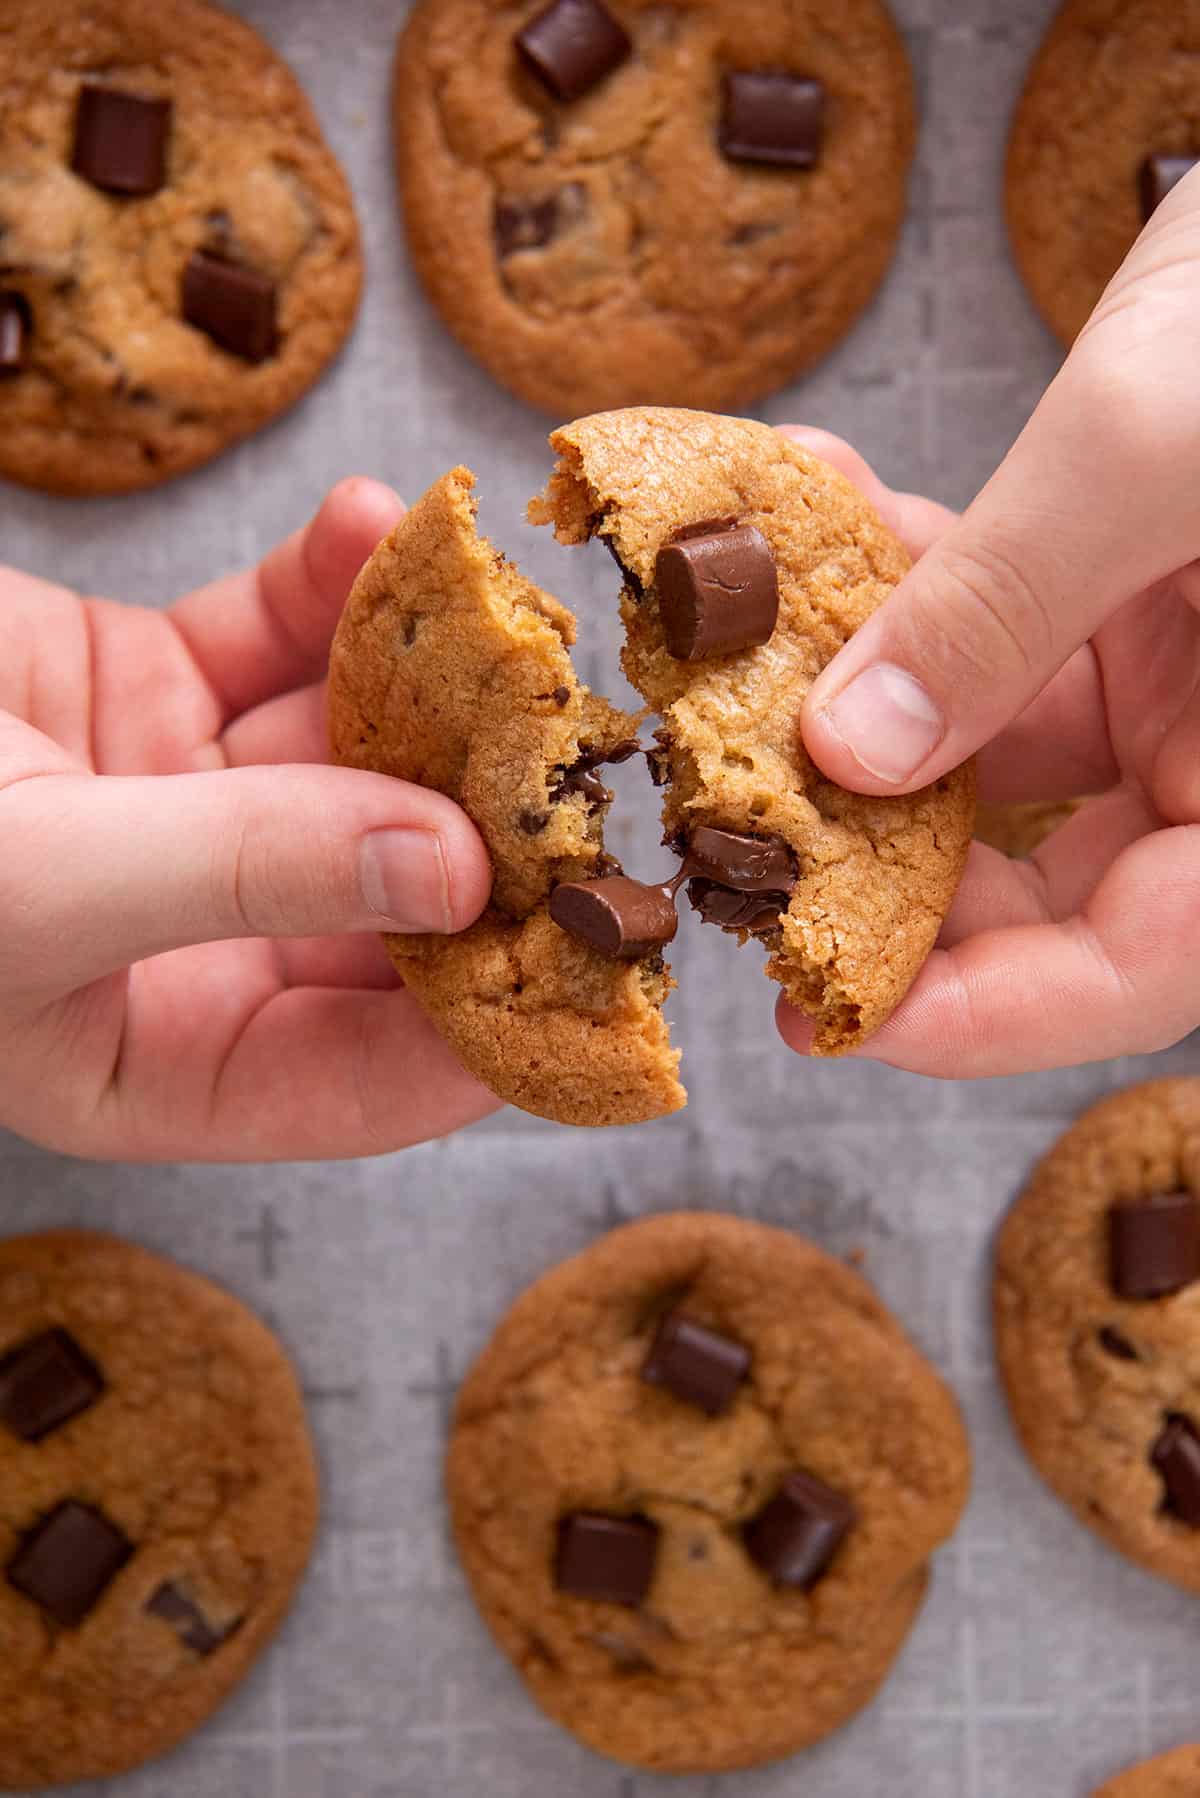 Hands holding up a toffee chocolate chip cookie and breaking it in half.